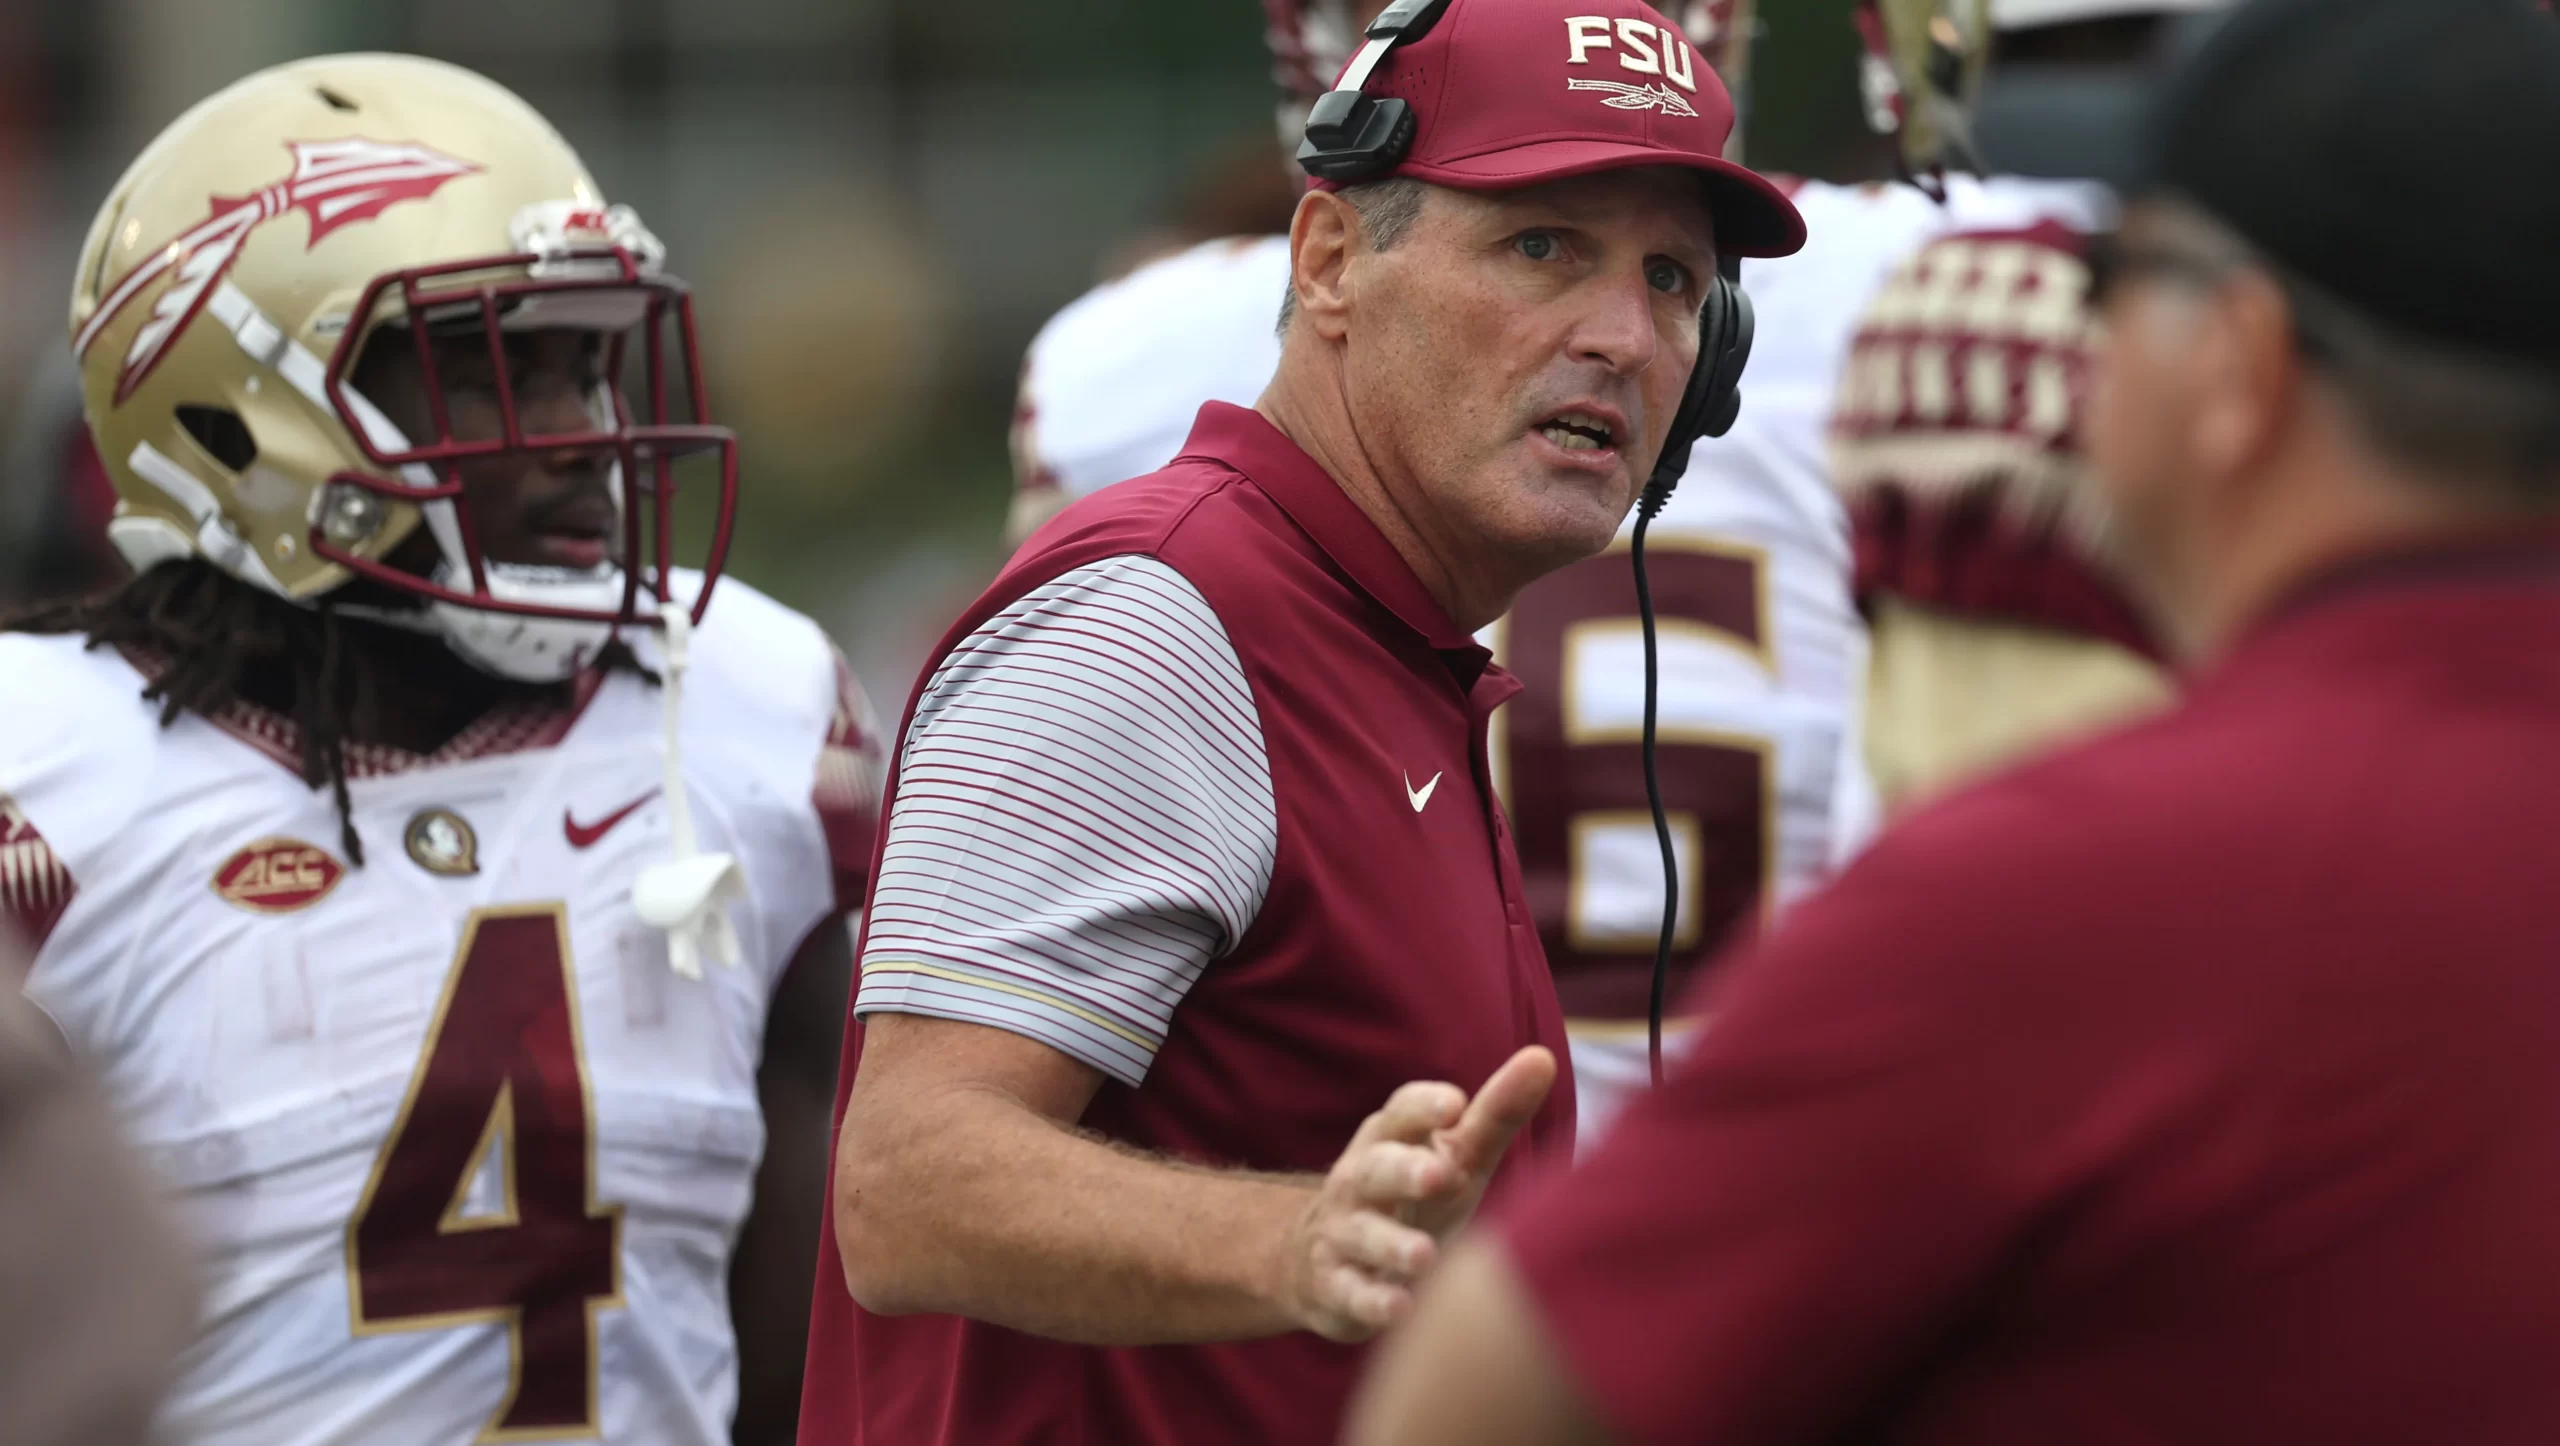 Veteran Coach Brewster With The Florida State University